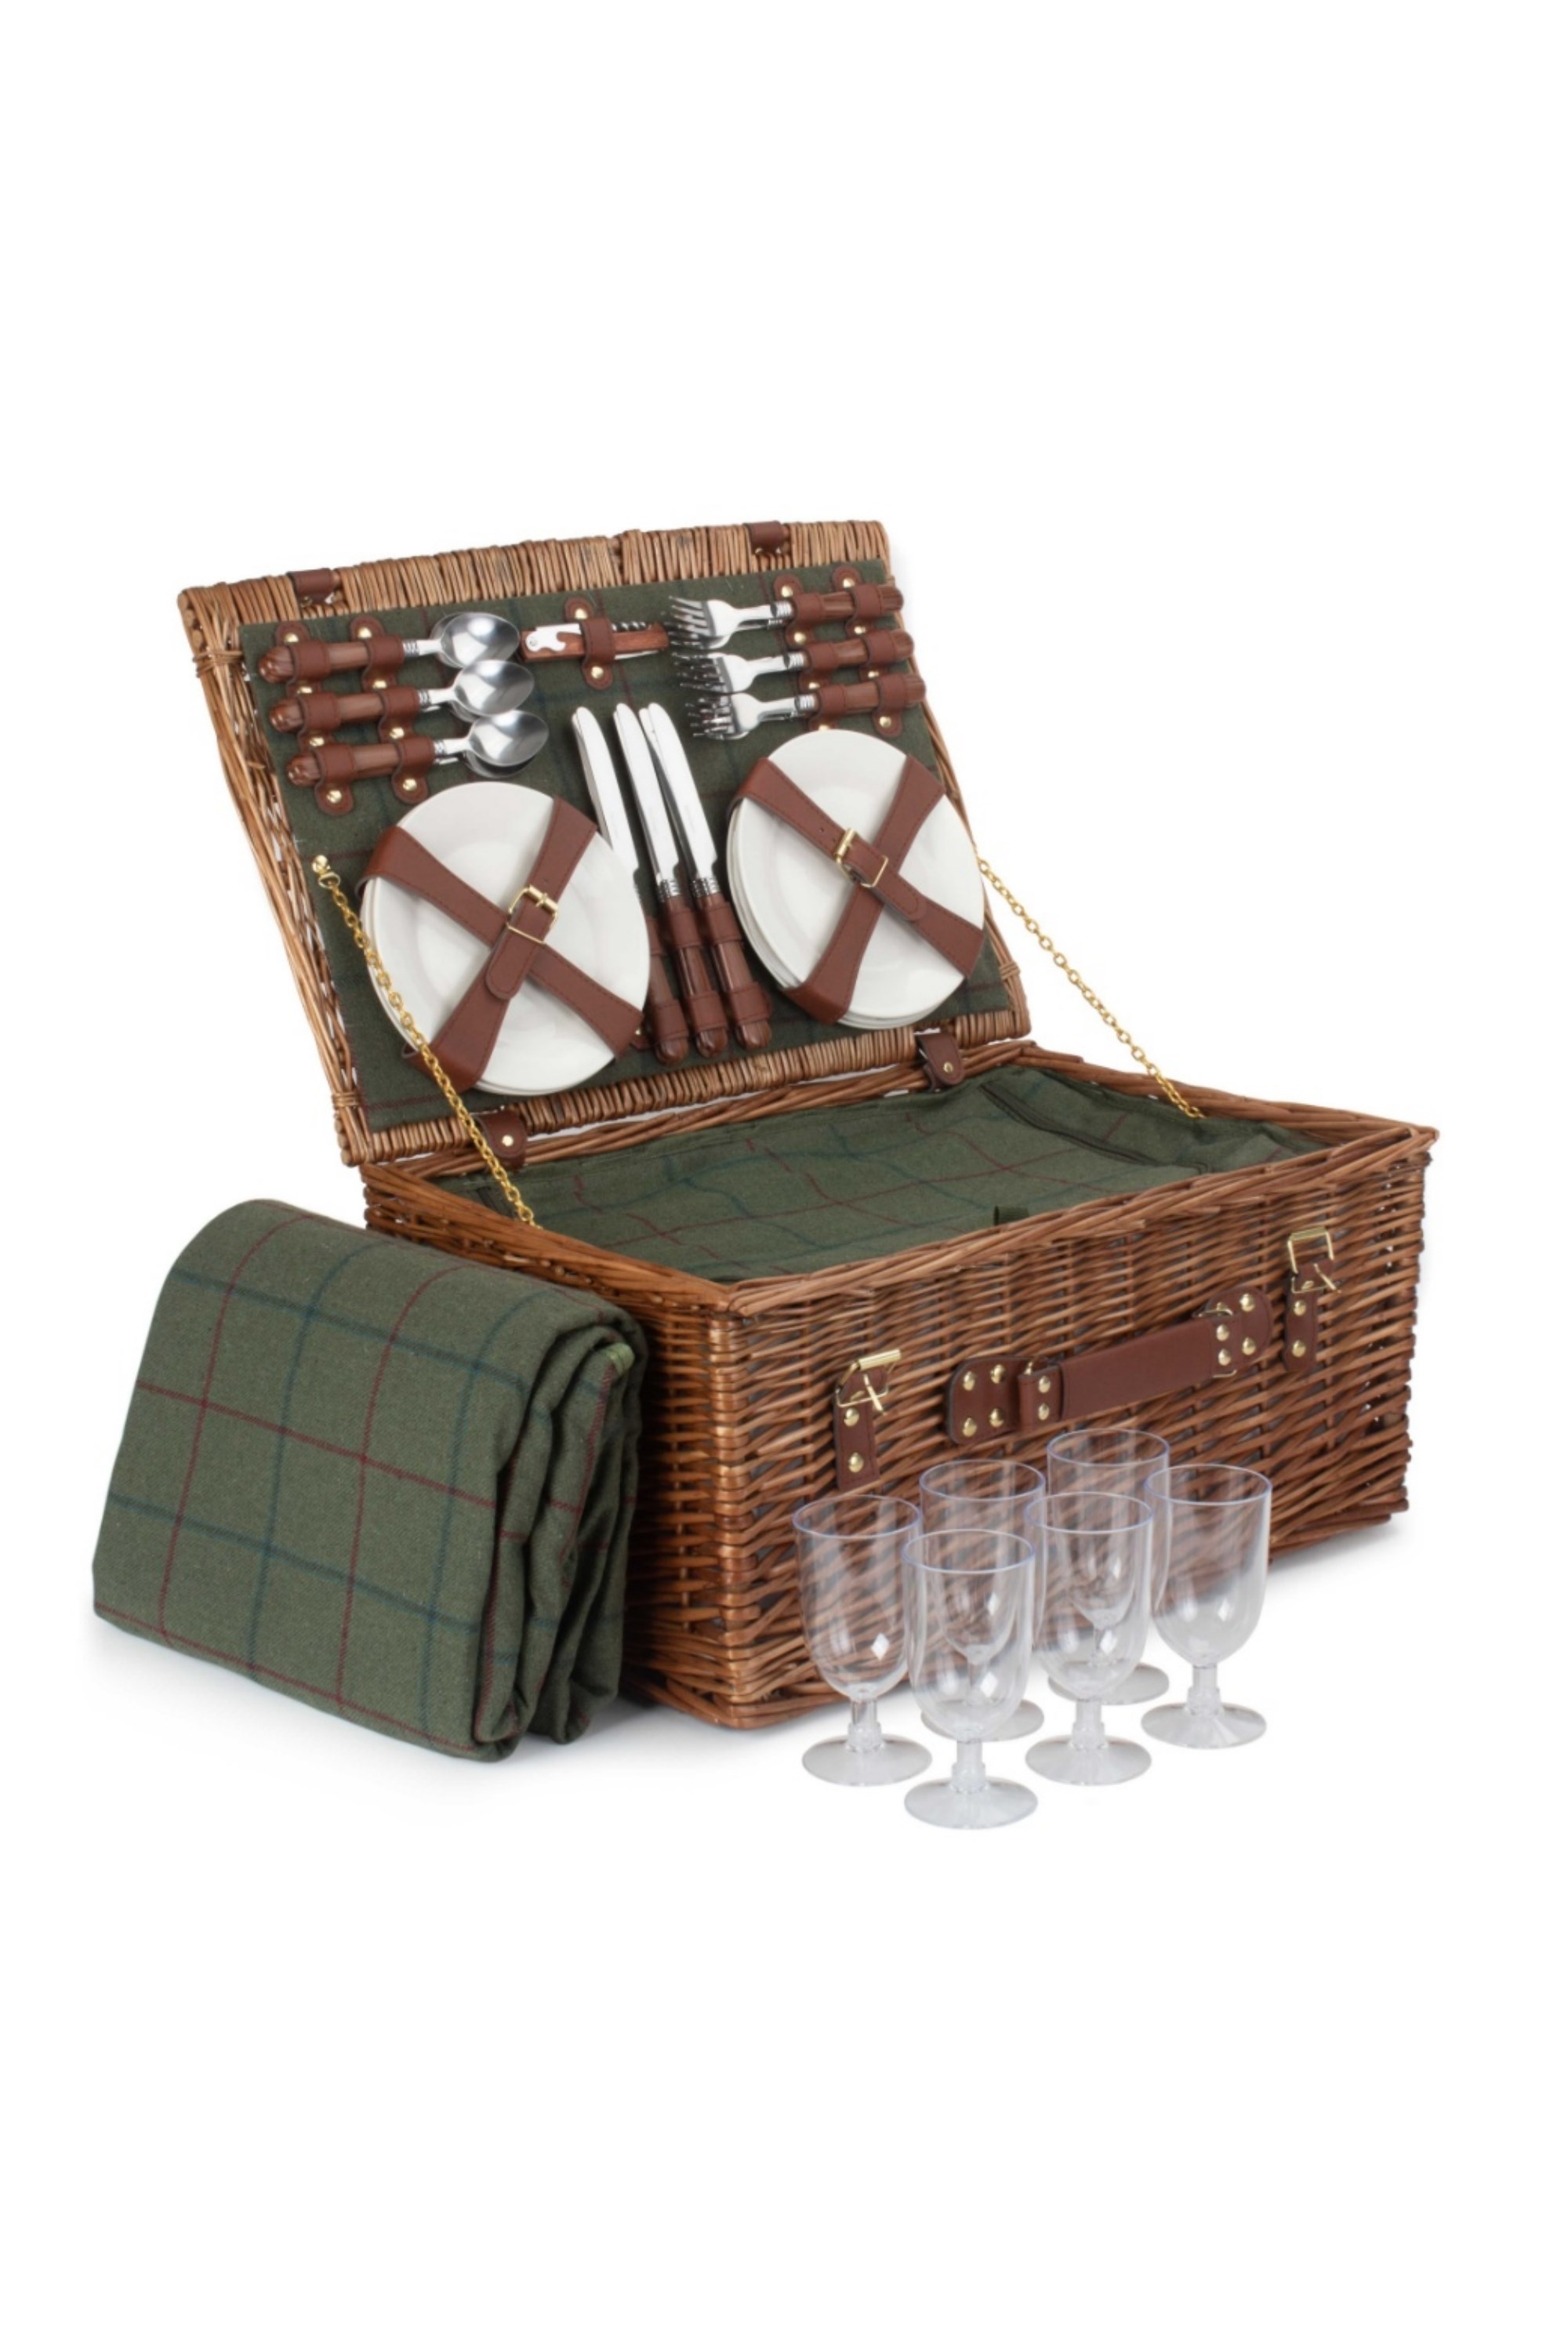 Wicker 6 Person Green Tweed Classic Picnic Basket -